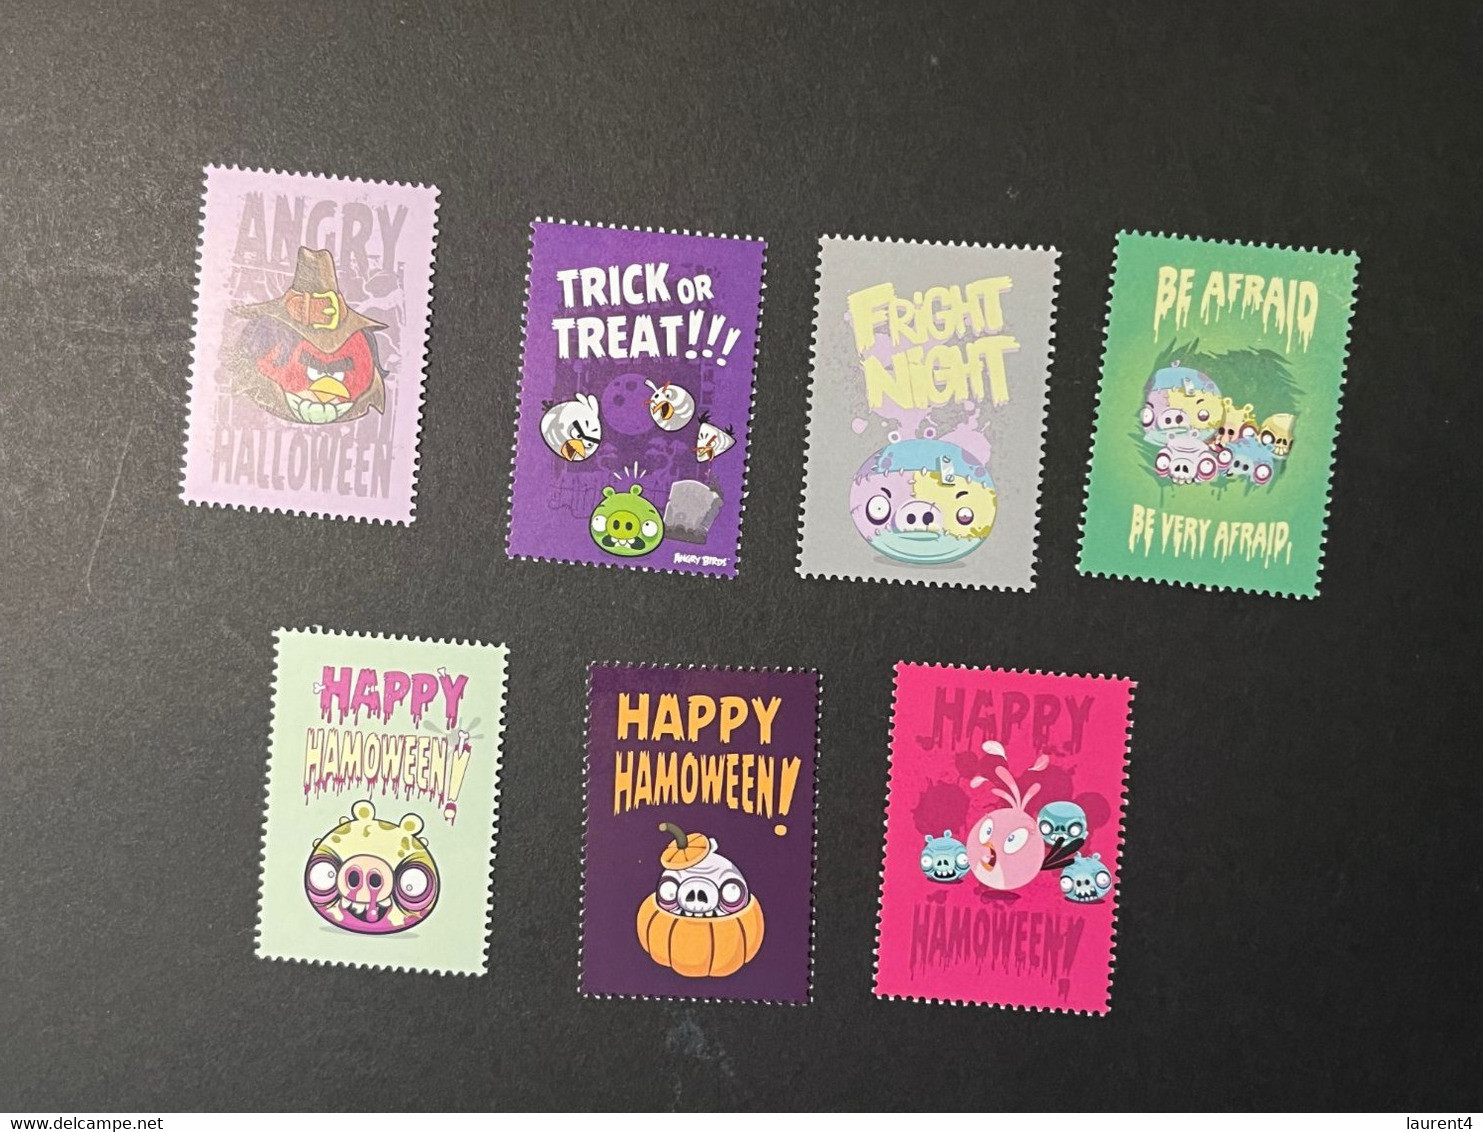 (STAMPS 7-1-2023) Australia - Halloween - ANGRY BIRDS Cinderella (TAG) 7 (mint) As Seen On Scan - Cinderelas